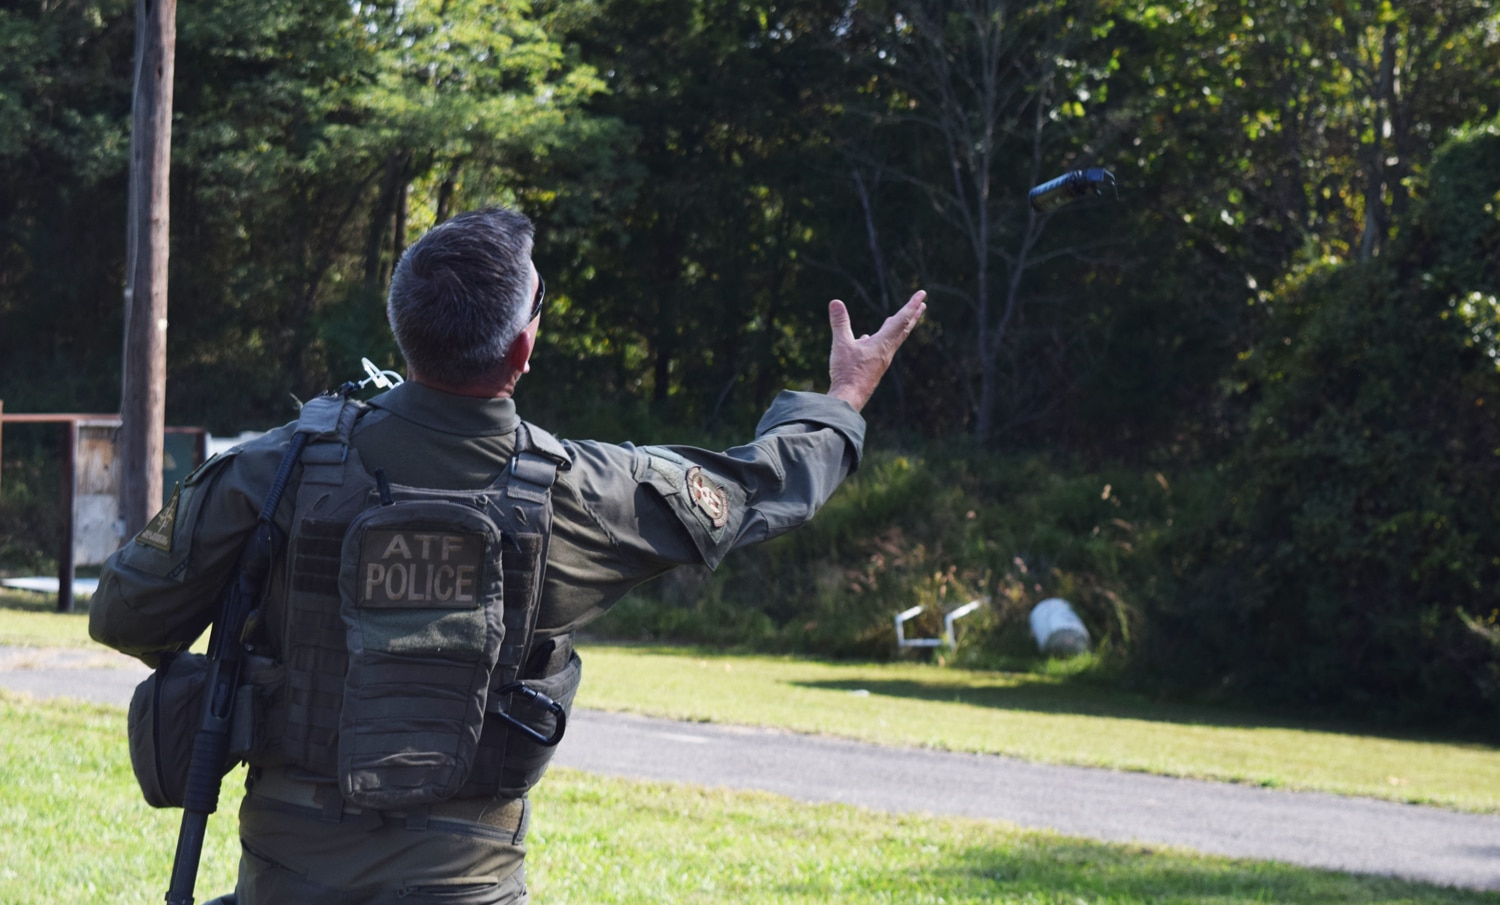 After a door breaching demonstration, an SRT agent tosses a flash bang into the air. The device is supposed to startle, confuse and disorient suspects. (Photo: Daniel Terrill/Guns.com)